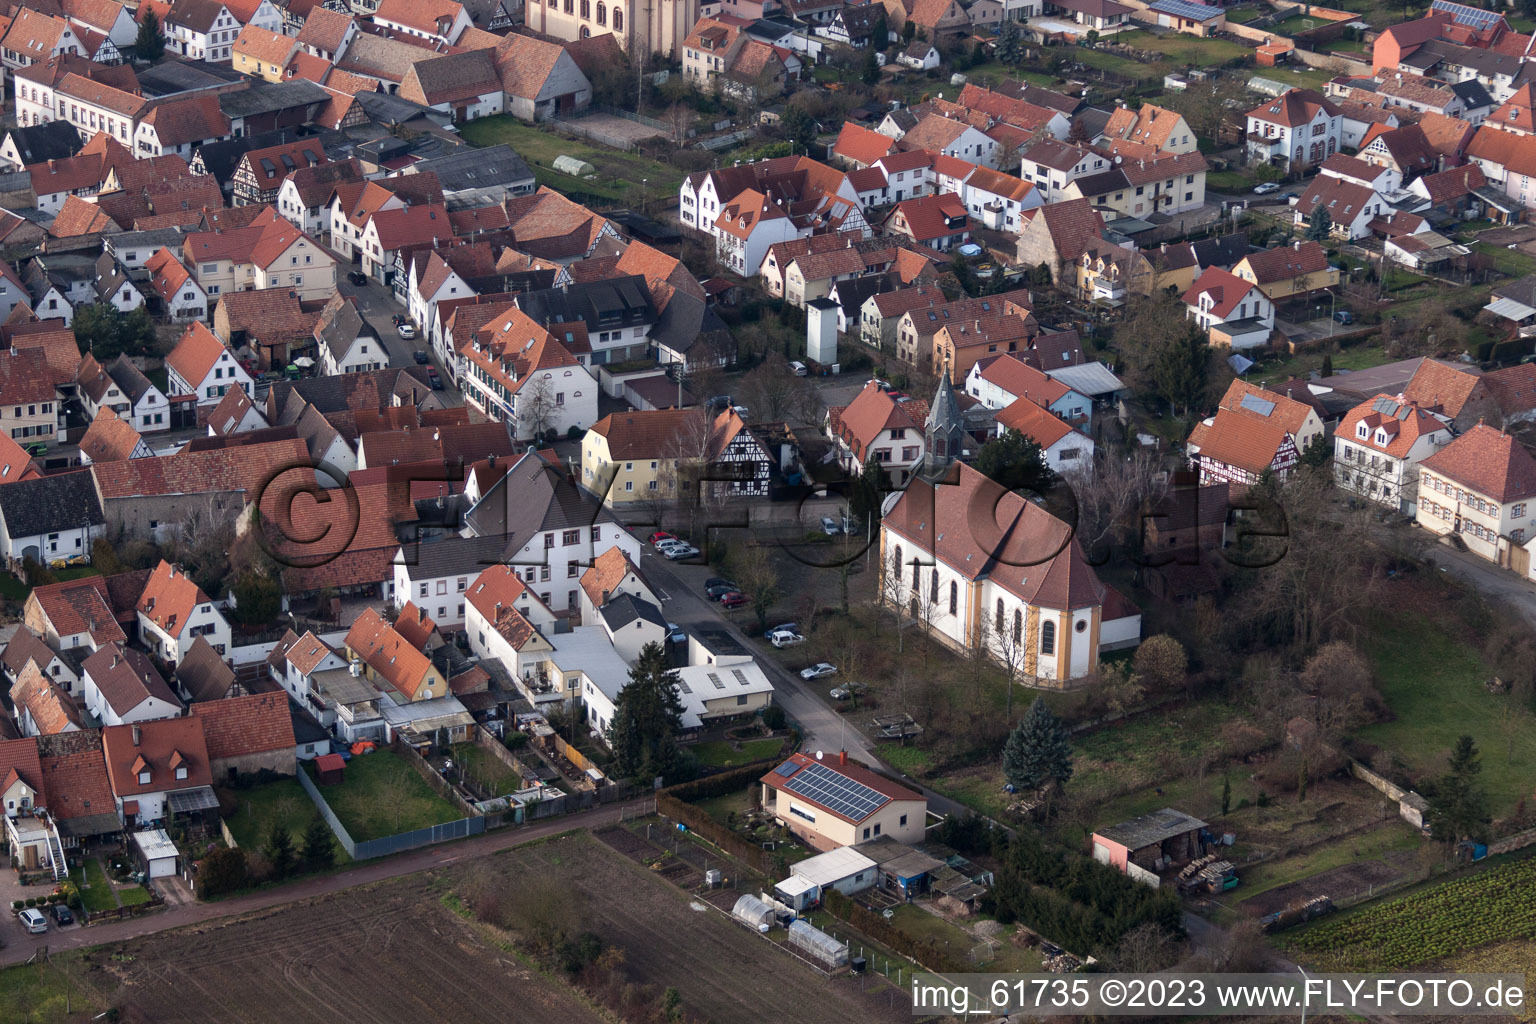 Aerial photograpy of Zeiskam in the state Rhineland-Palatinate, Germany